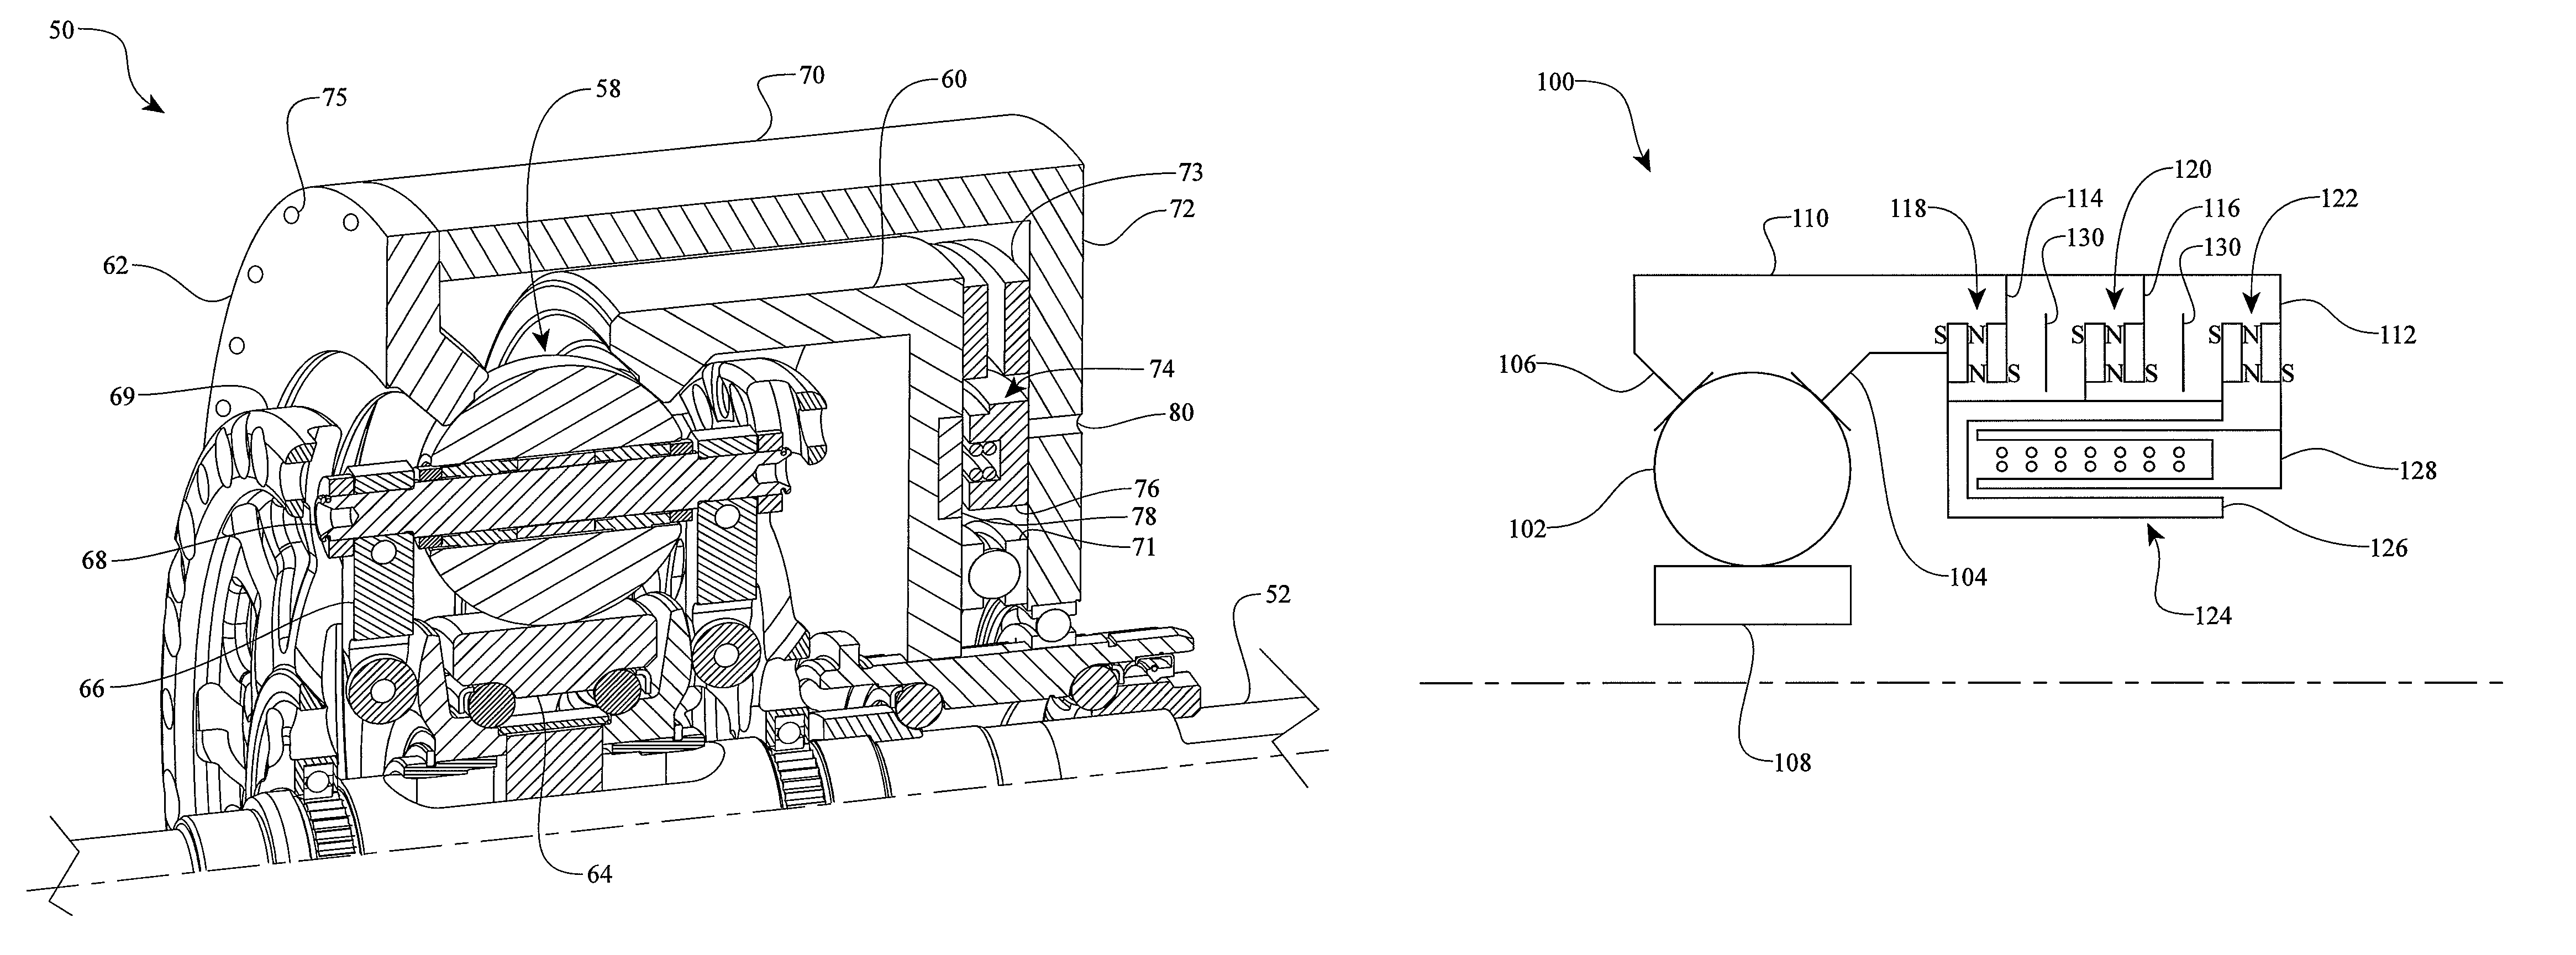 Assemblies and methods for clamping force generation